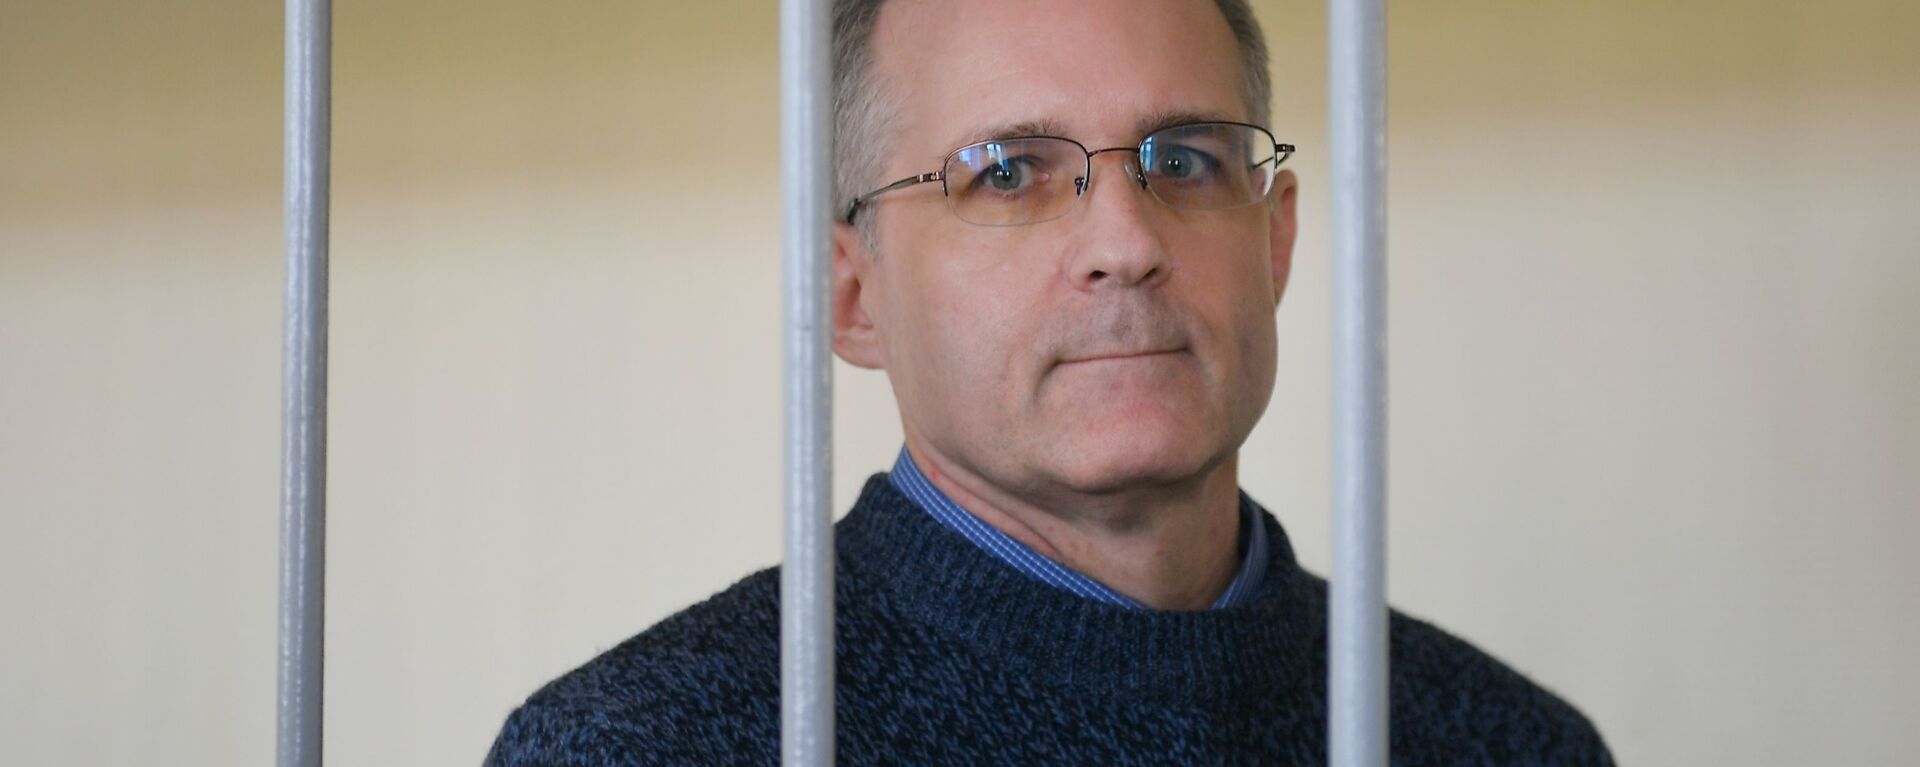 U.S. Paul Whelan waits in a courtroom as the court considers requests to extending his arrest until October 28, at the Lefortovsky Court, in Moscow, Russia. Whelan was accused of espionage and detained by the Russian Federal Security Service on December 28, 2018 - Sputnik International, 1920, 08.11.2021